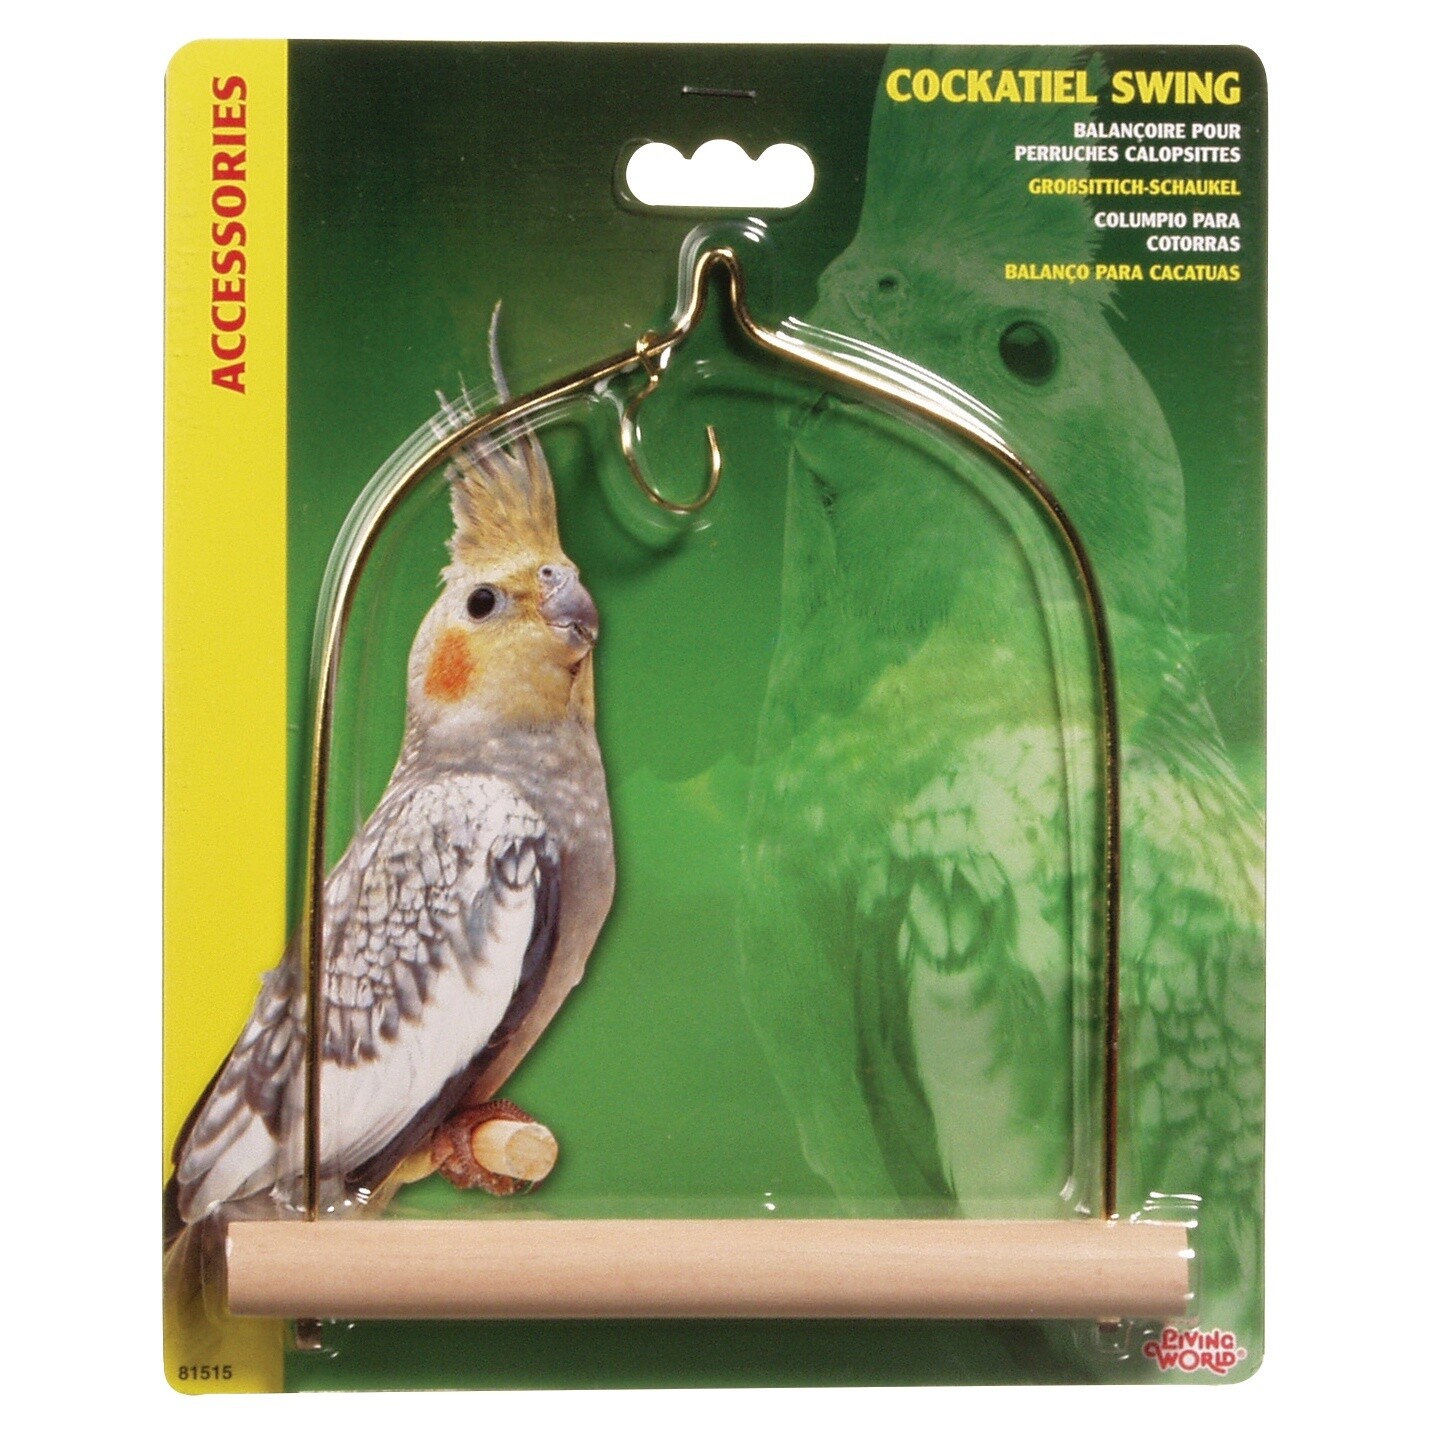 Living World Bird Swing with Wooden Perch For Cockatiels - 14 x 17.5 cm (5.5 x 7 in)